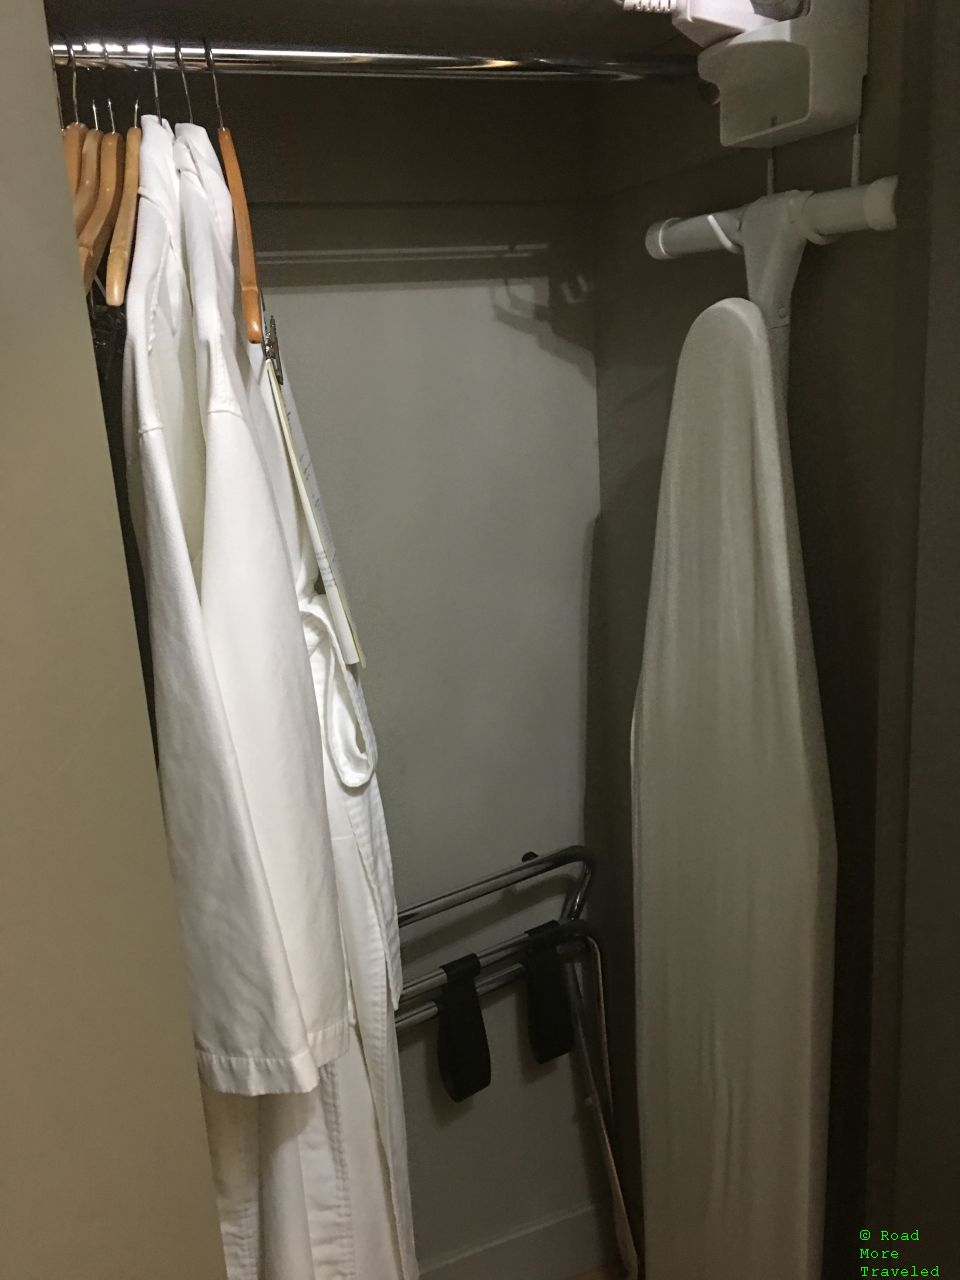 Sheraton Four Points YYZ - closet and ironing board